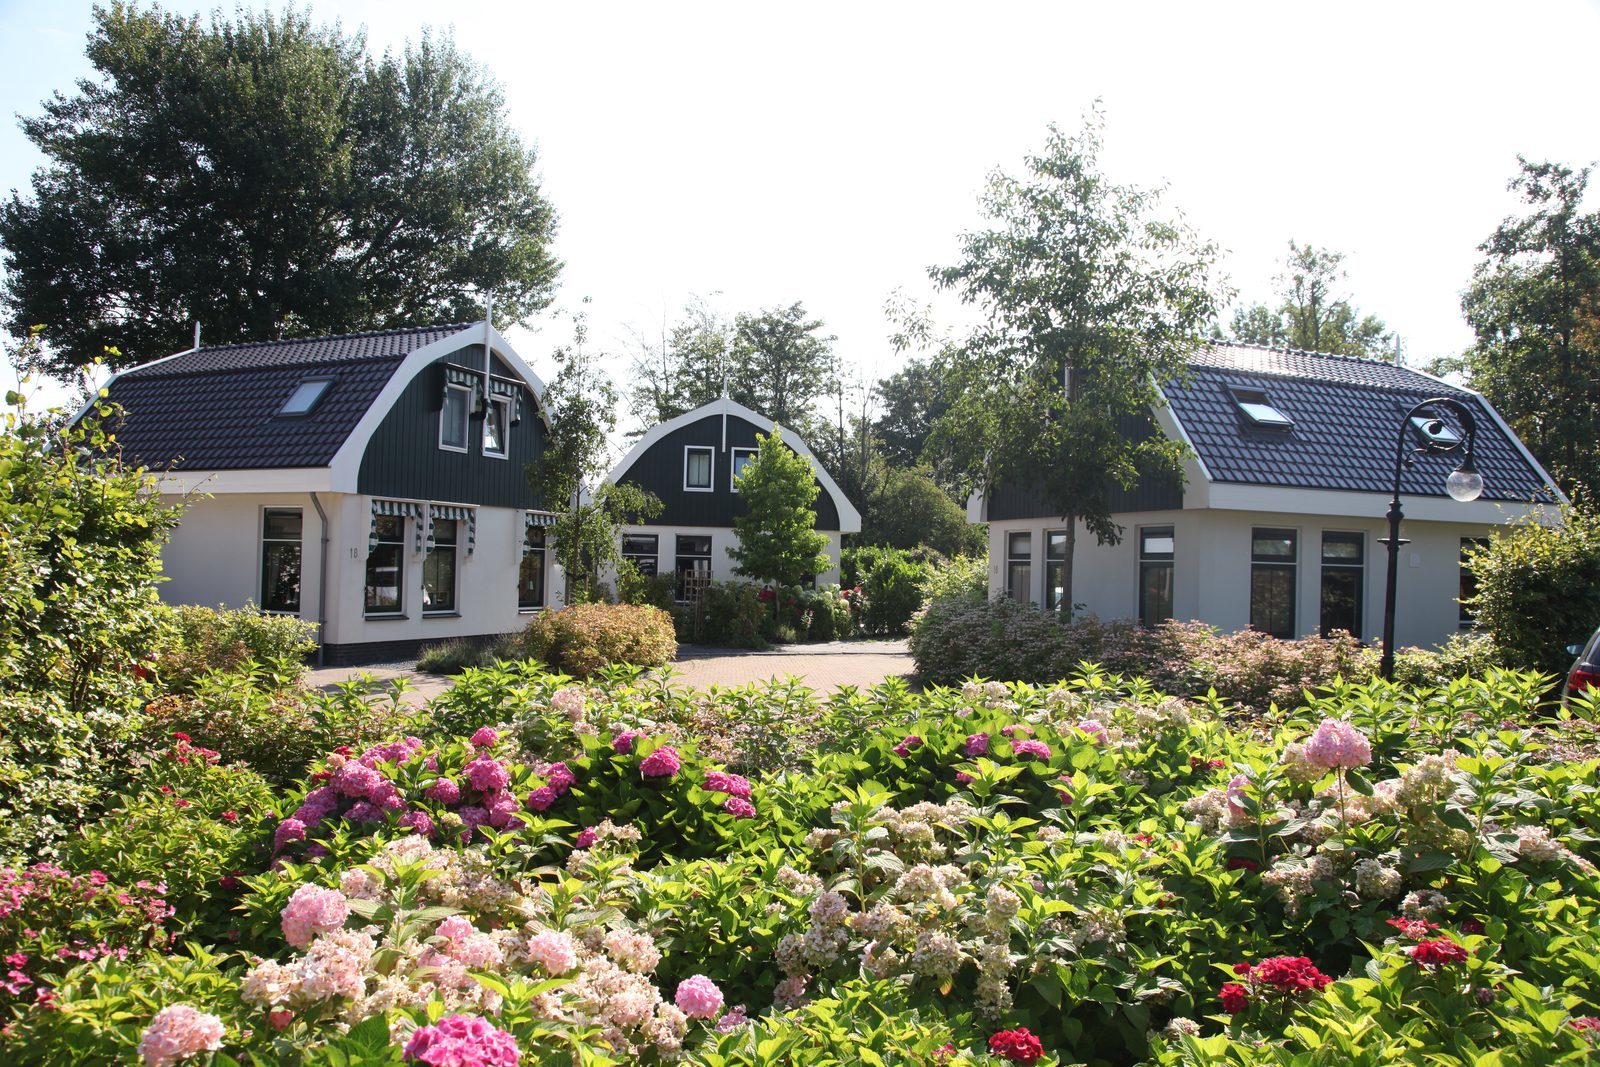 Take a look at our holiday homes